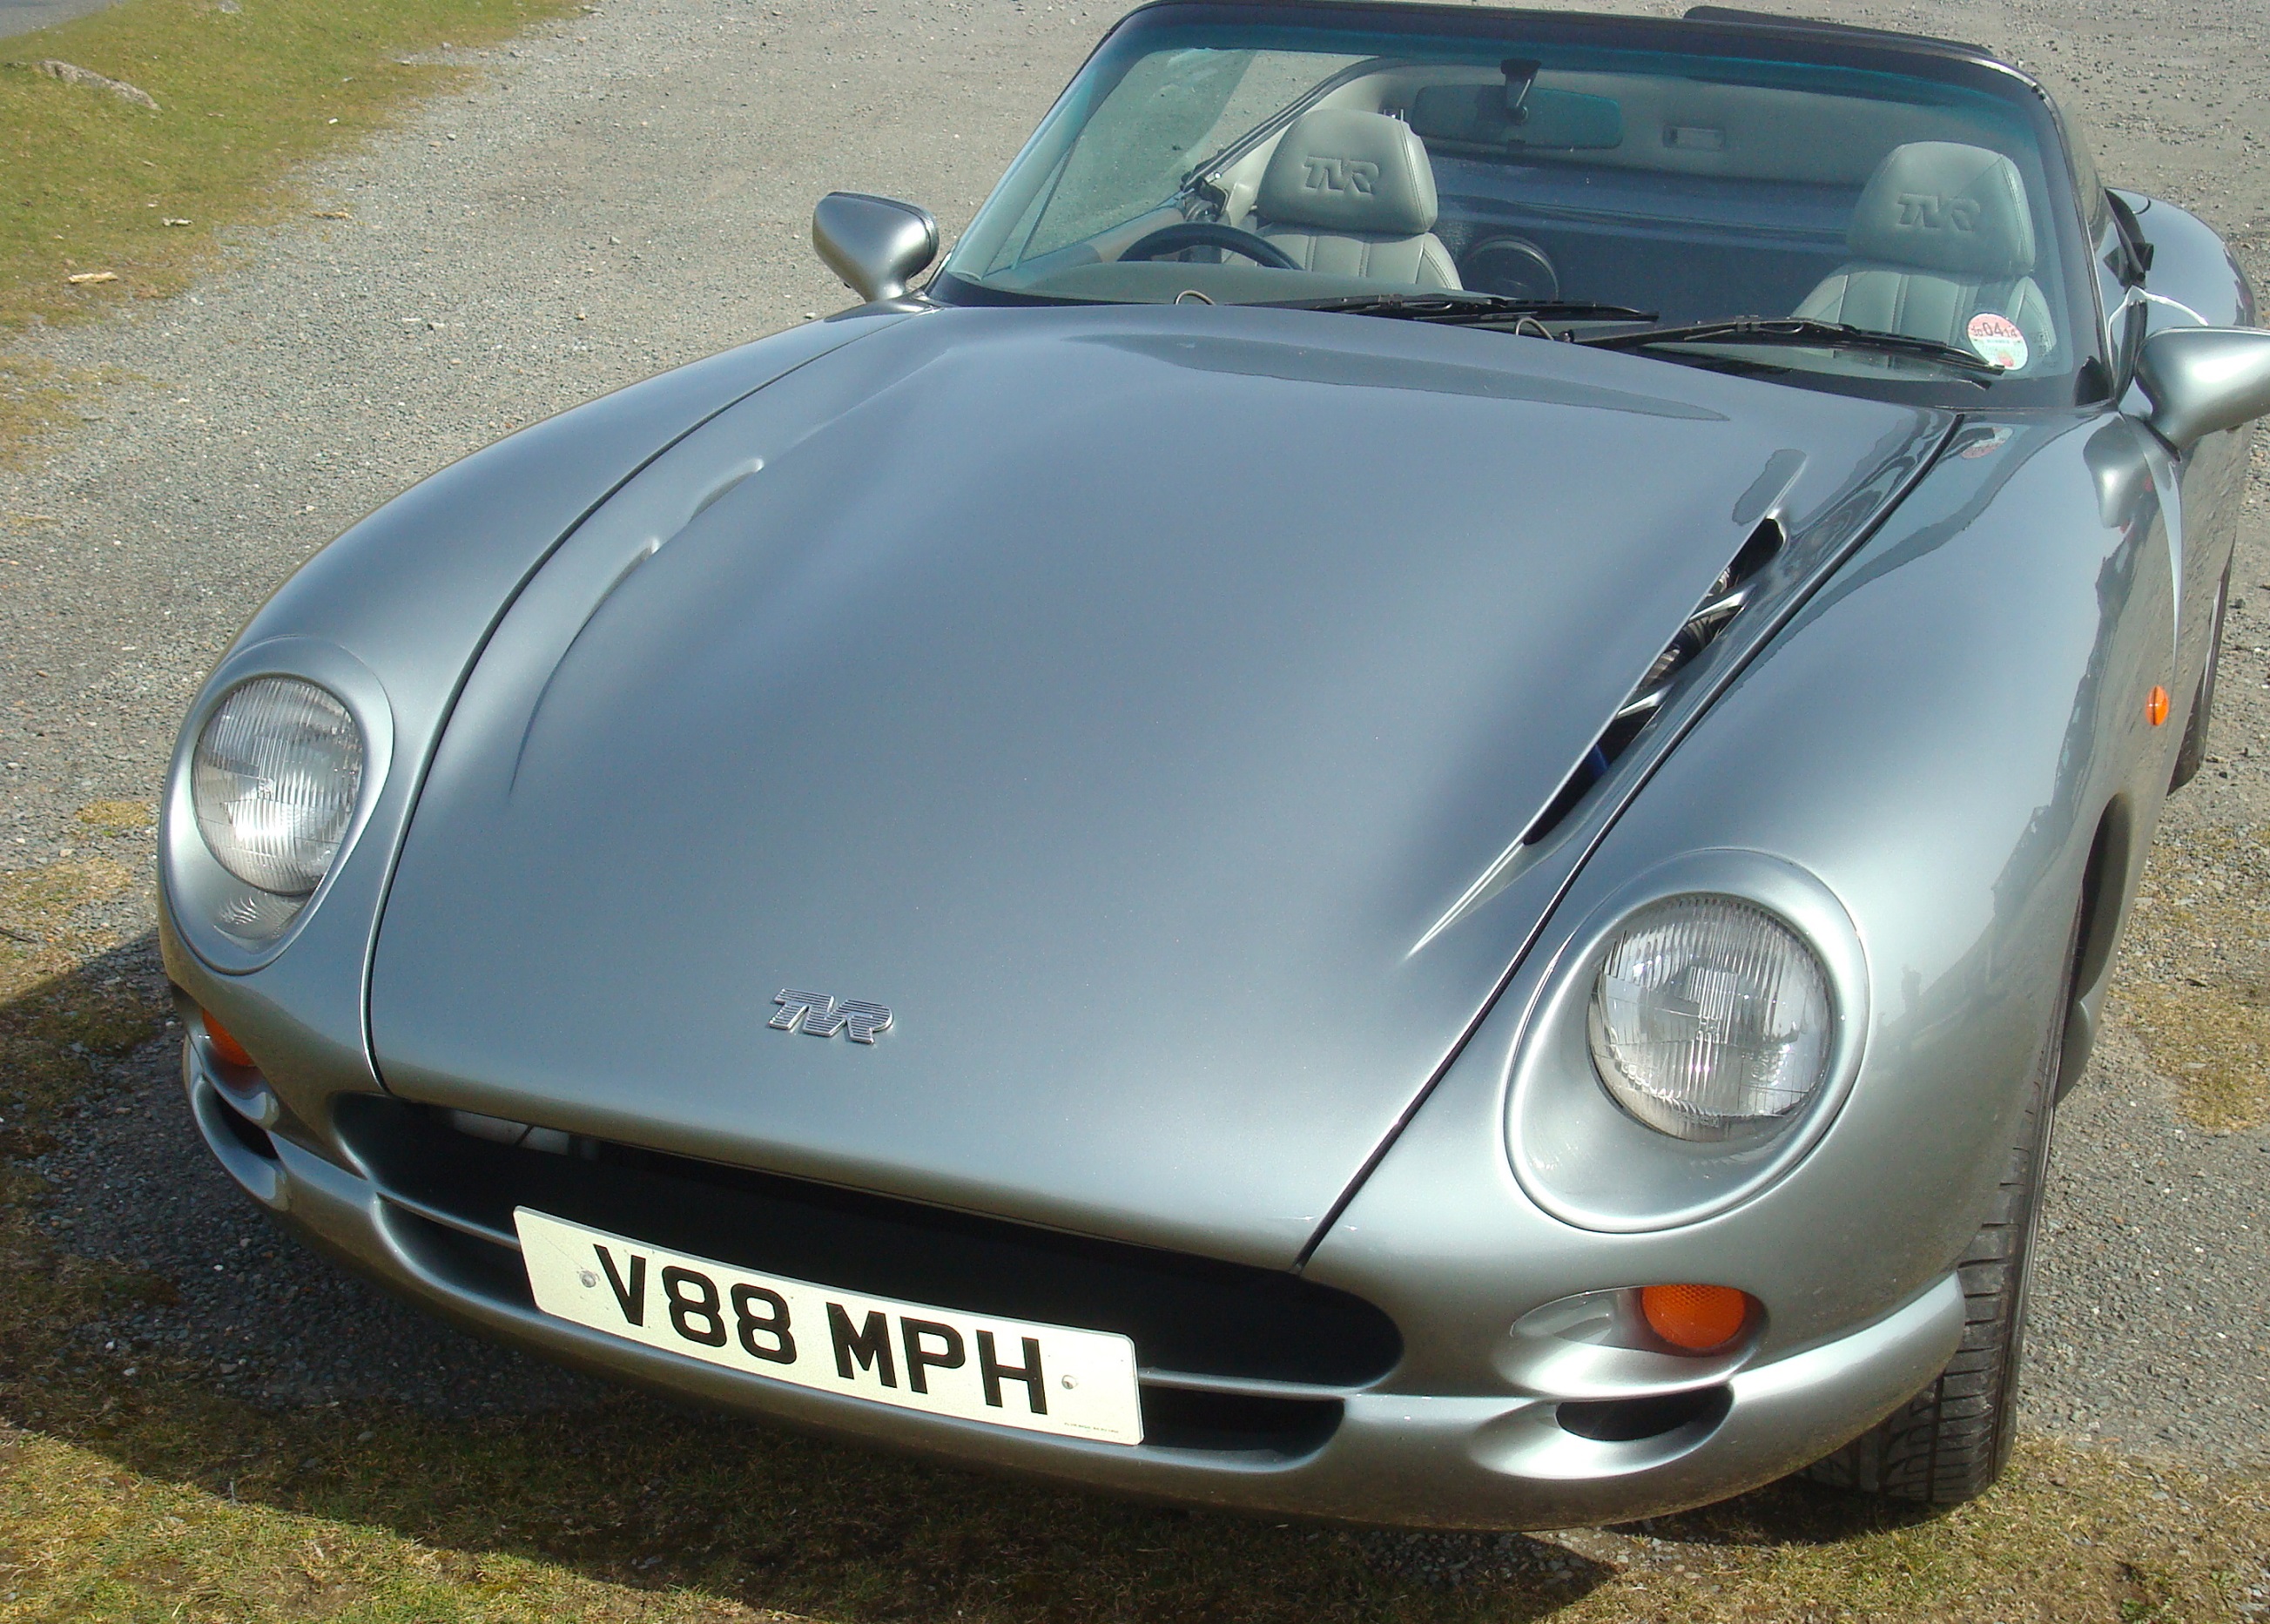 Show me your grey paint bodies - Page 1 - General TVR Stuff & Gossip - PistonHeads